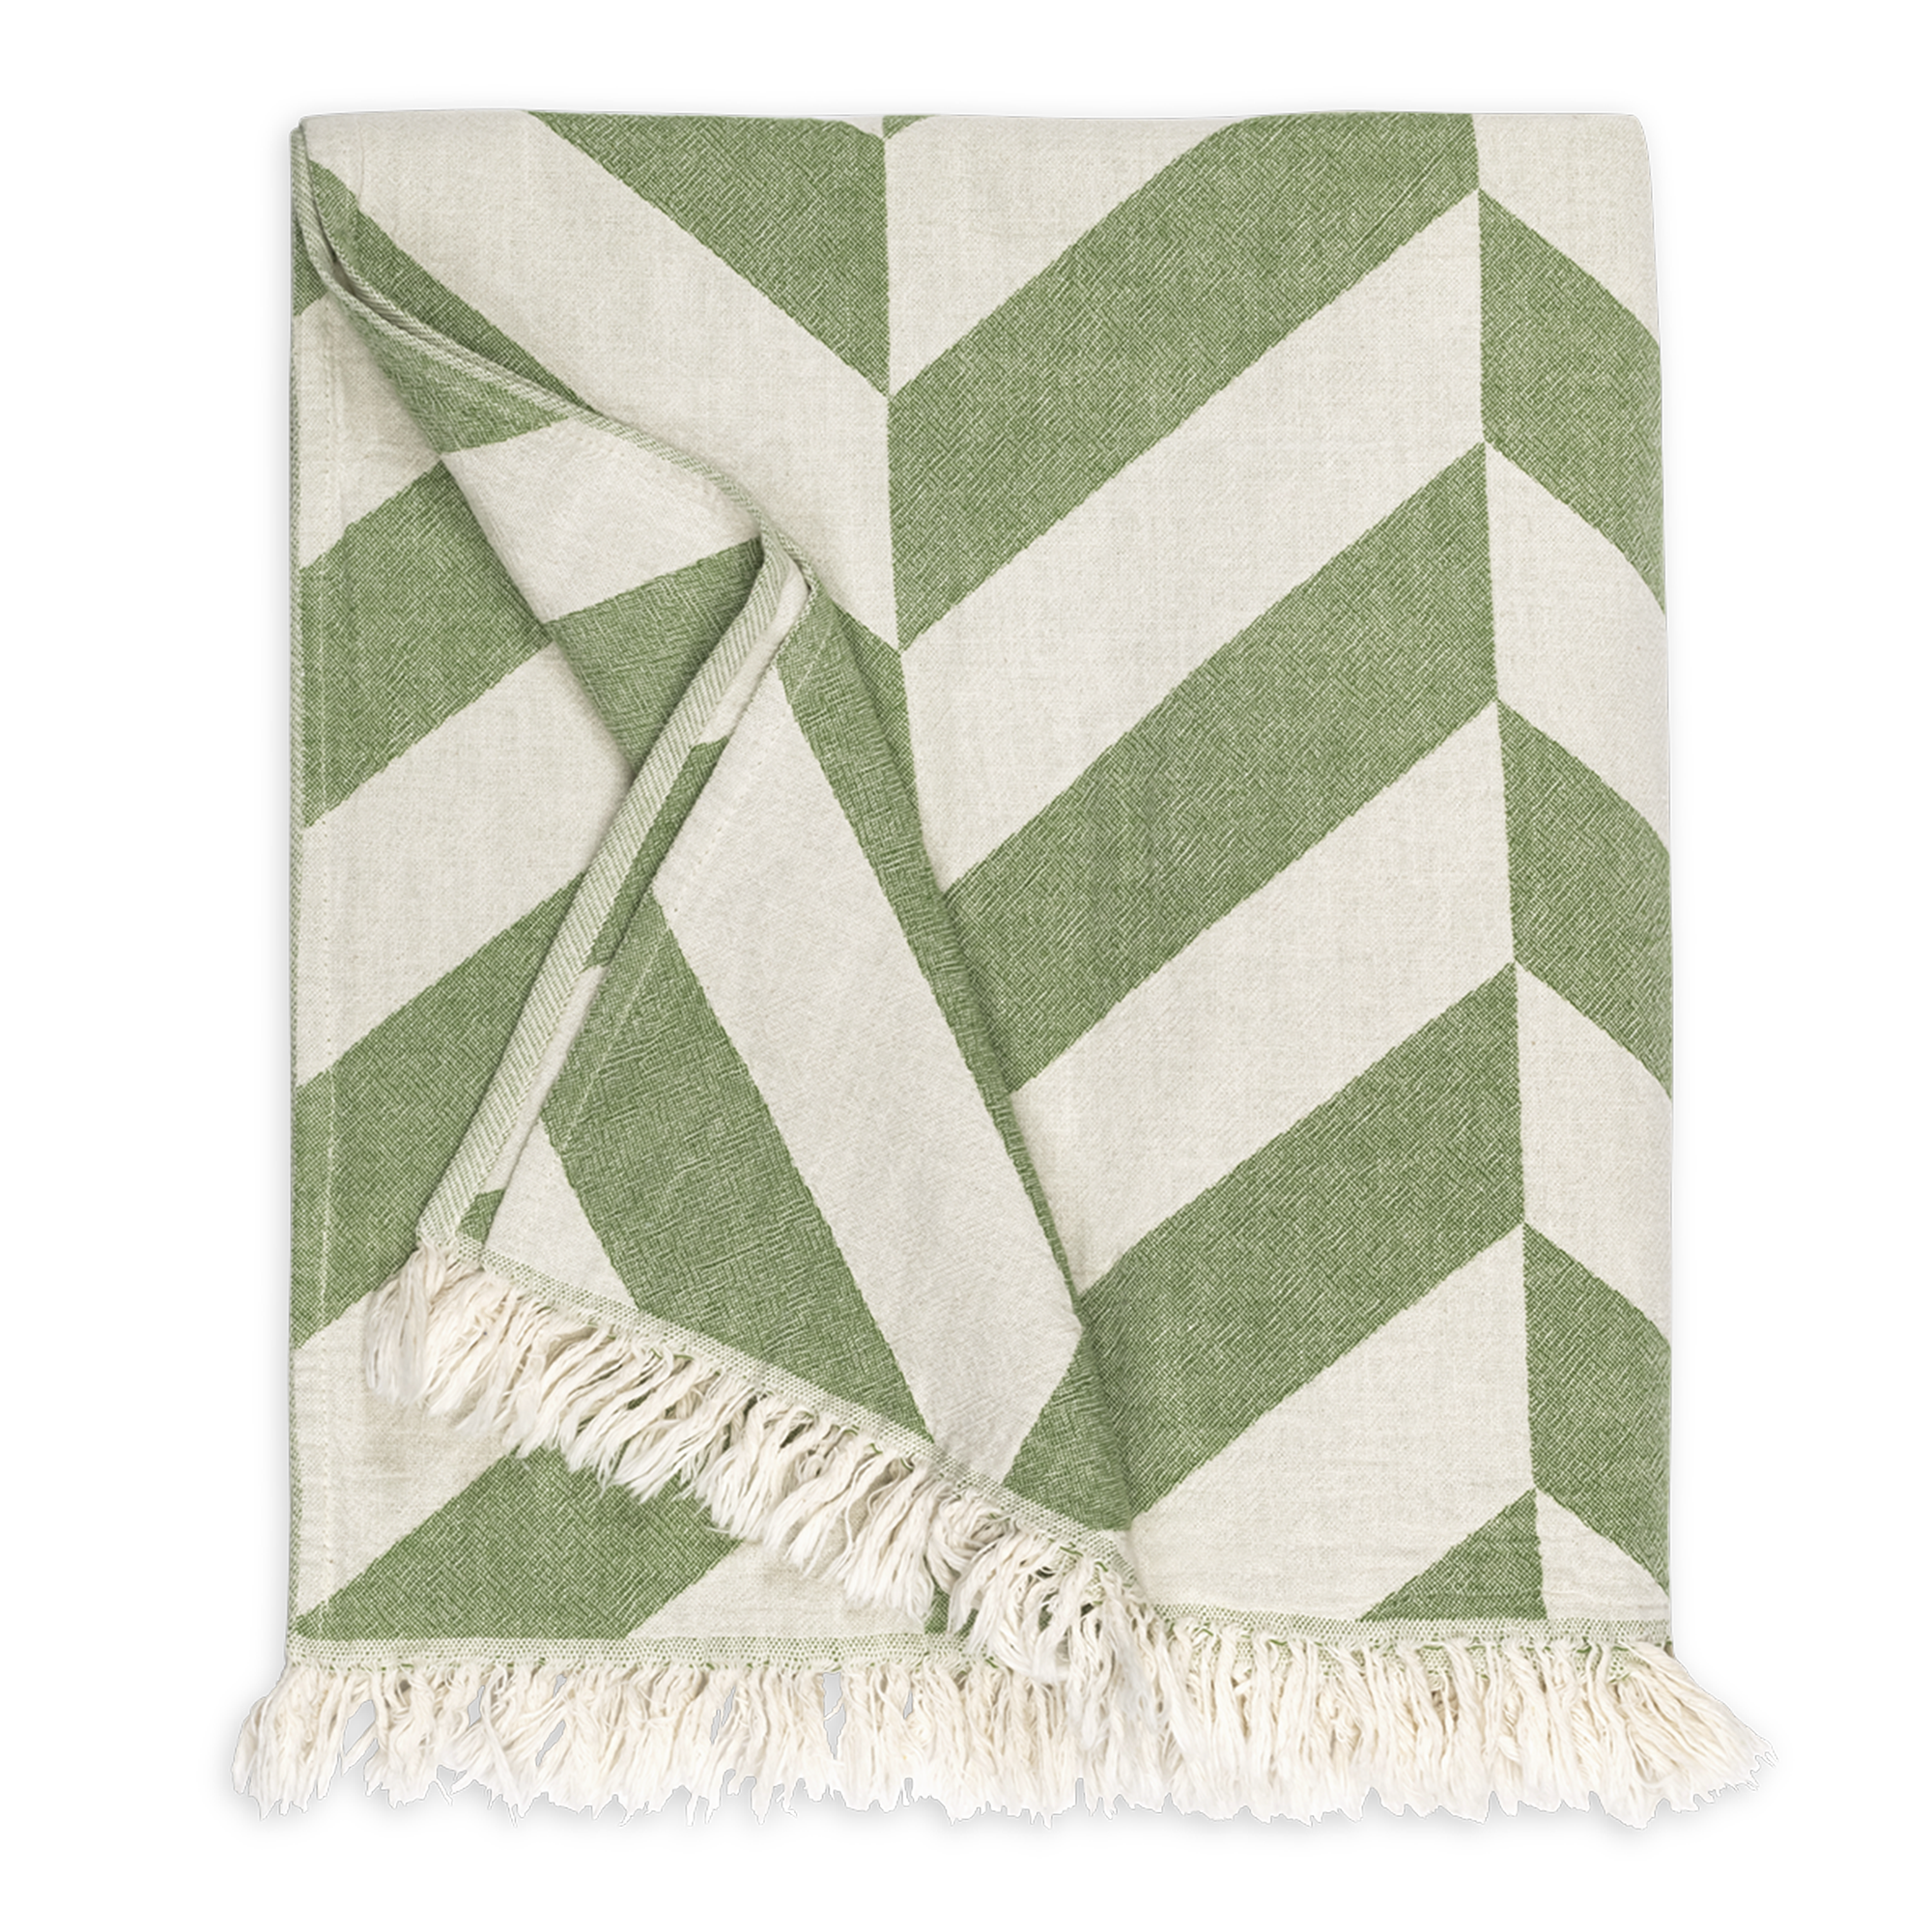 Folded Silo of Matouk Paros Beach Towels in Color Grass